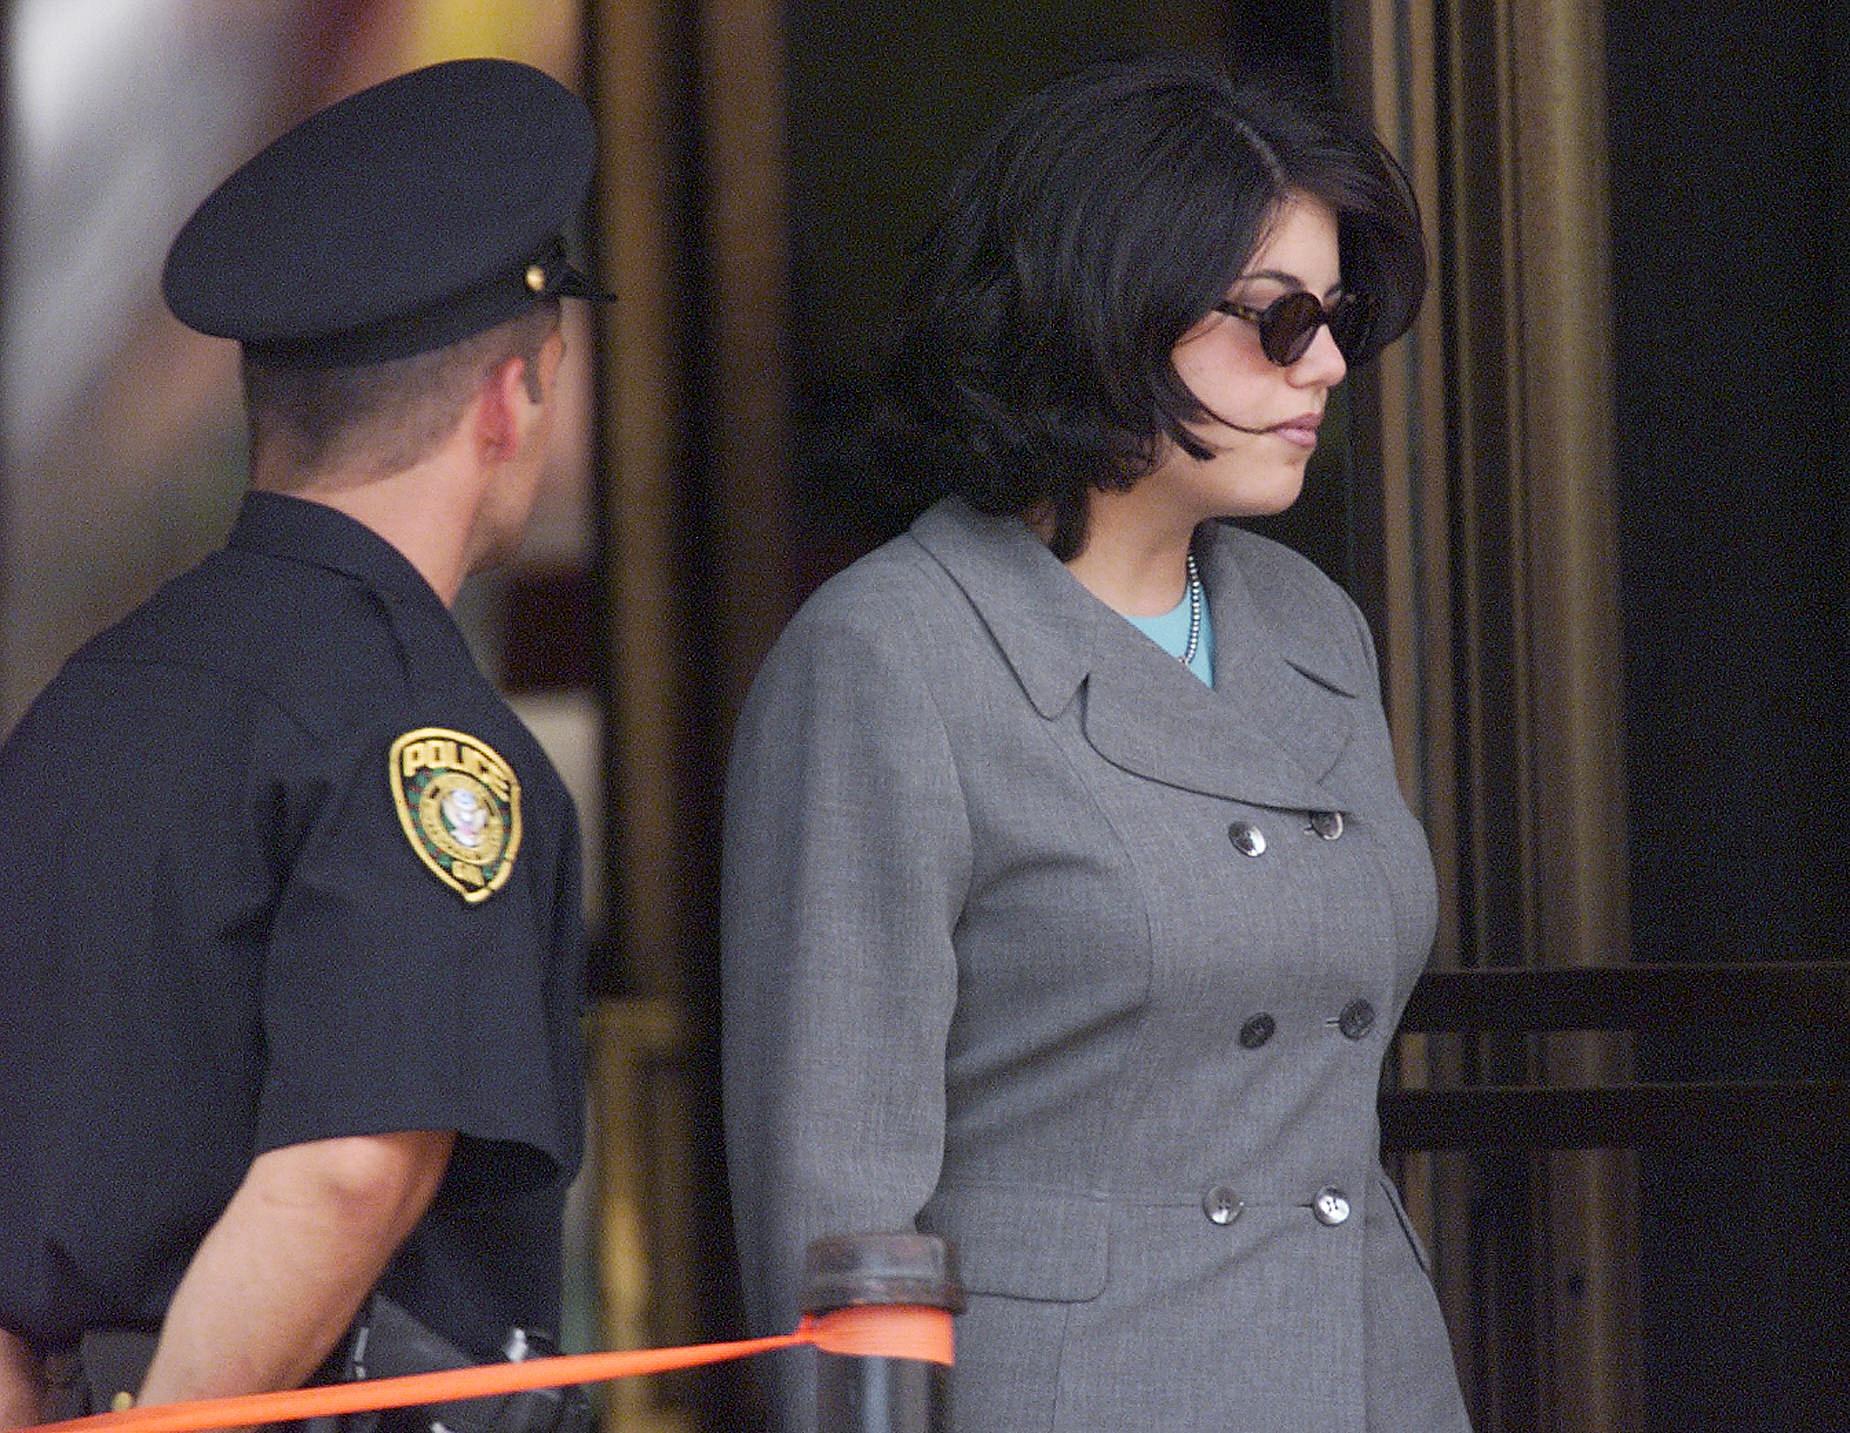 Monica Lewinsky (R) pictured leaving court on August 20, 1998 | Source: Getty Images